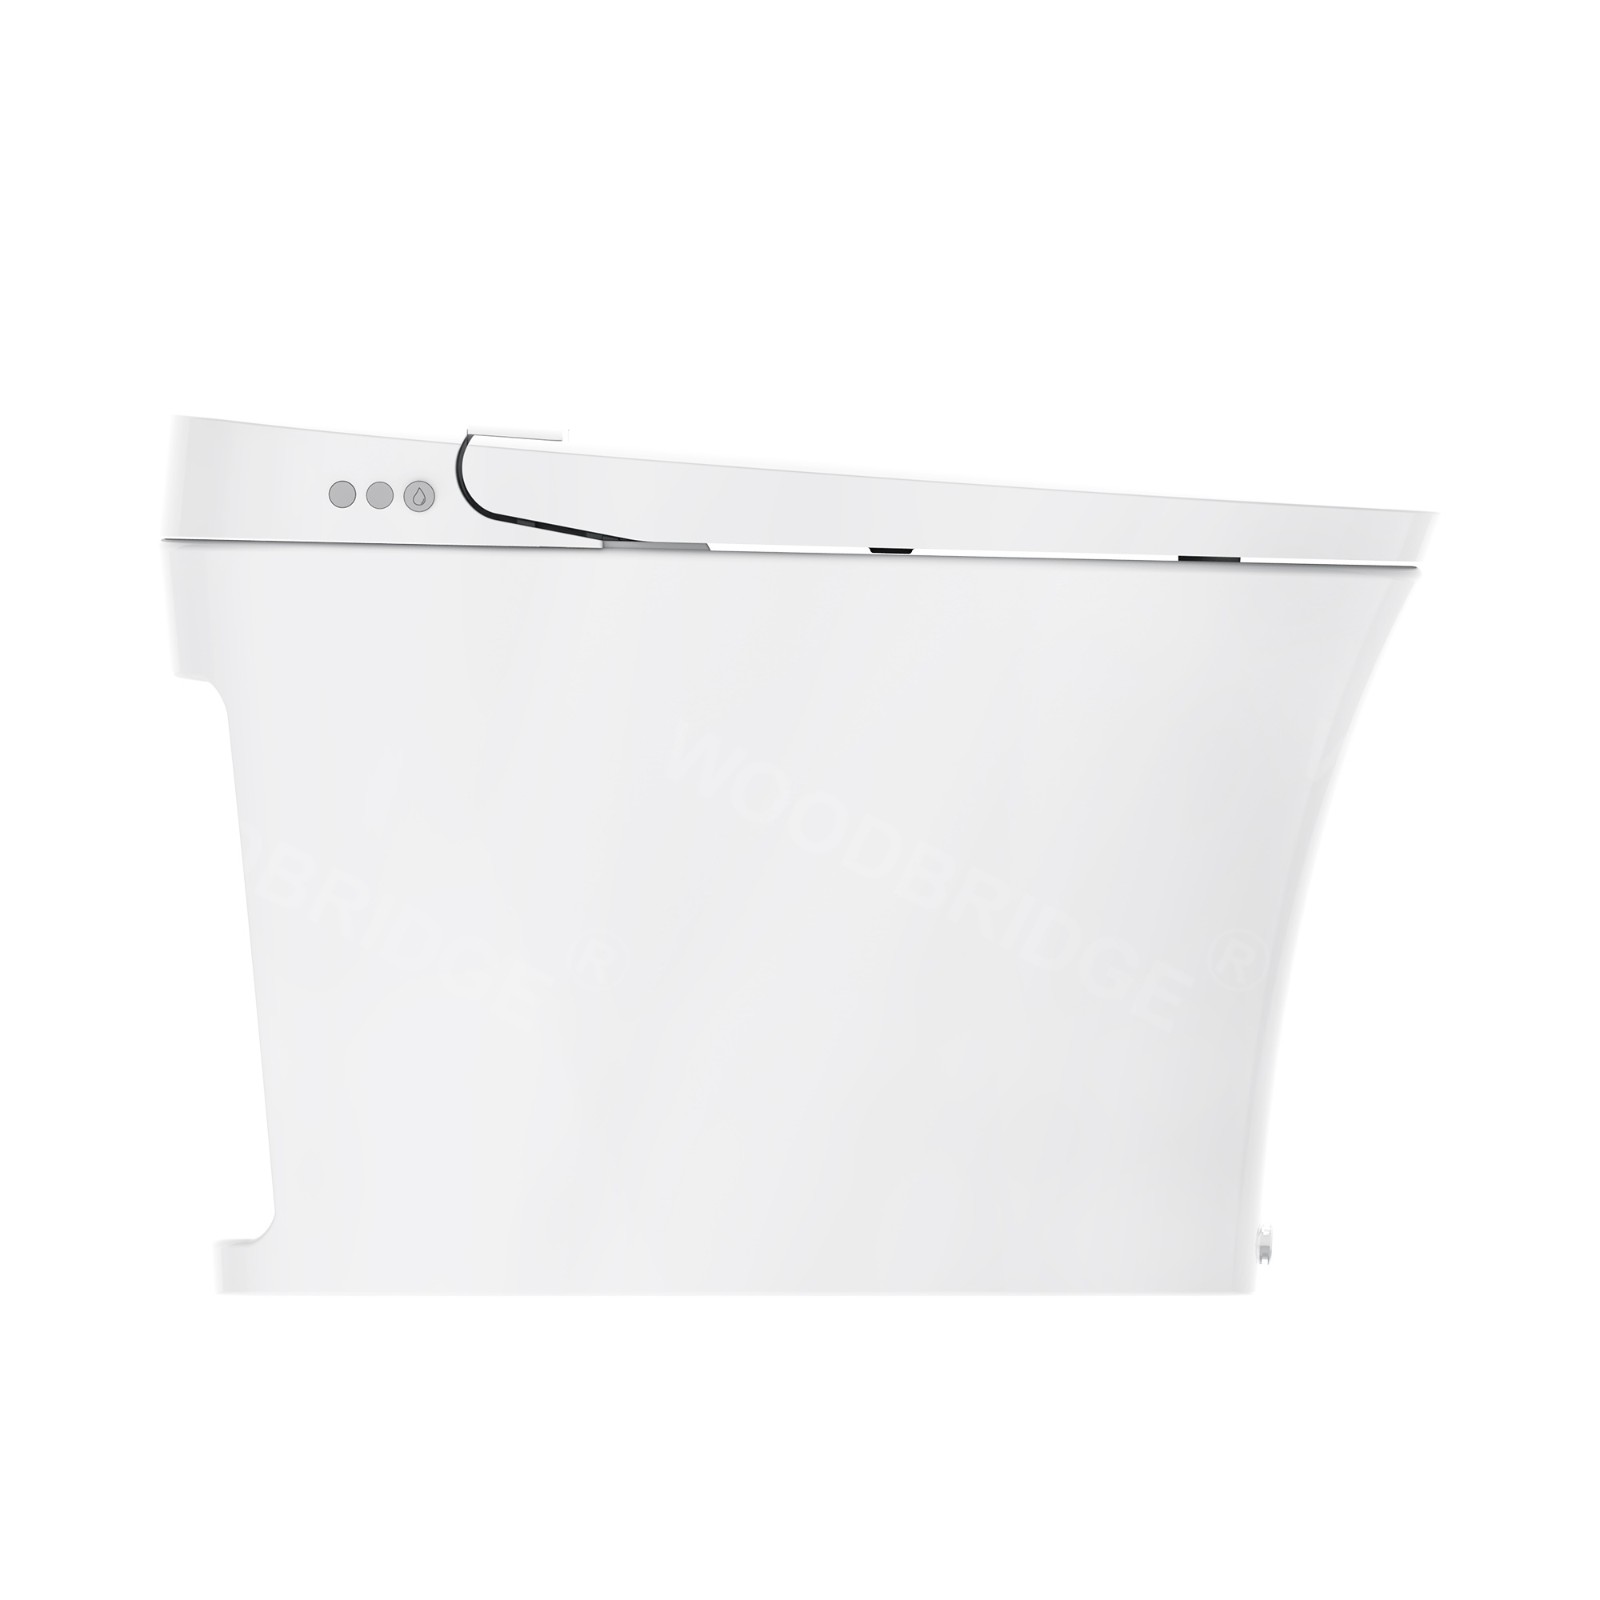  WOODBRIDGE BW5100S One Piece Modern,Slim, Tankless and High Efficiency Toilet with Battery Operated Auto Flushing_5059